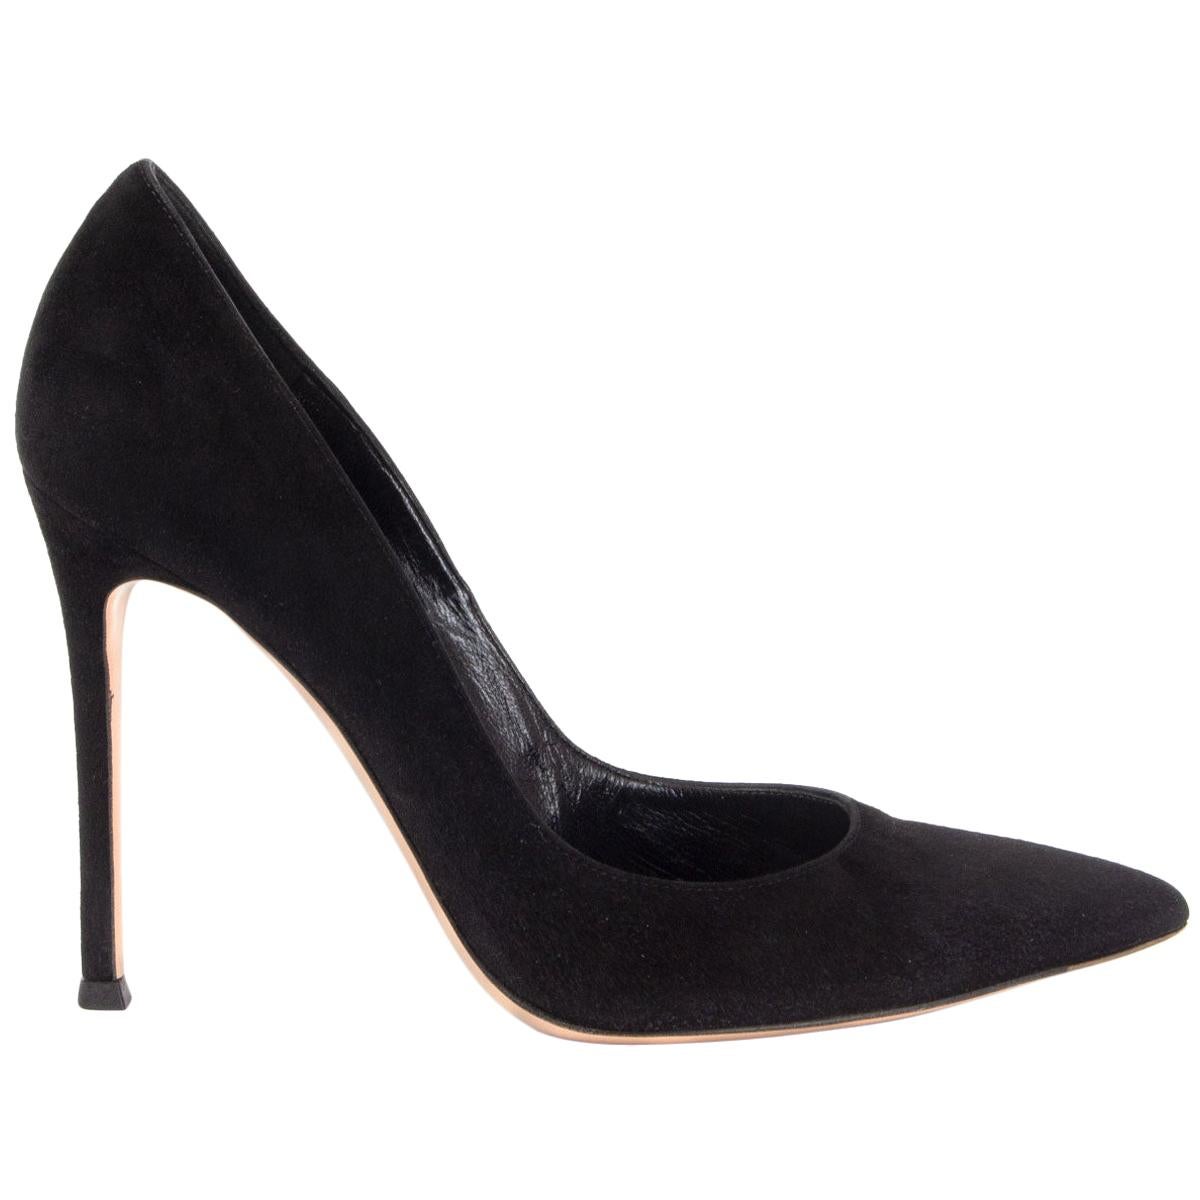 GIANVITO ROSSI black suede Pointed Toe Stiletto Pumps Shoes 37.5